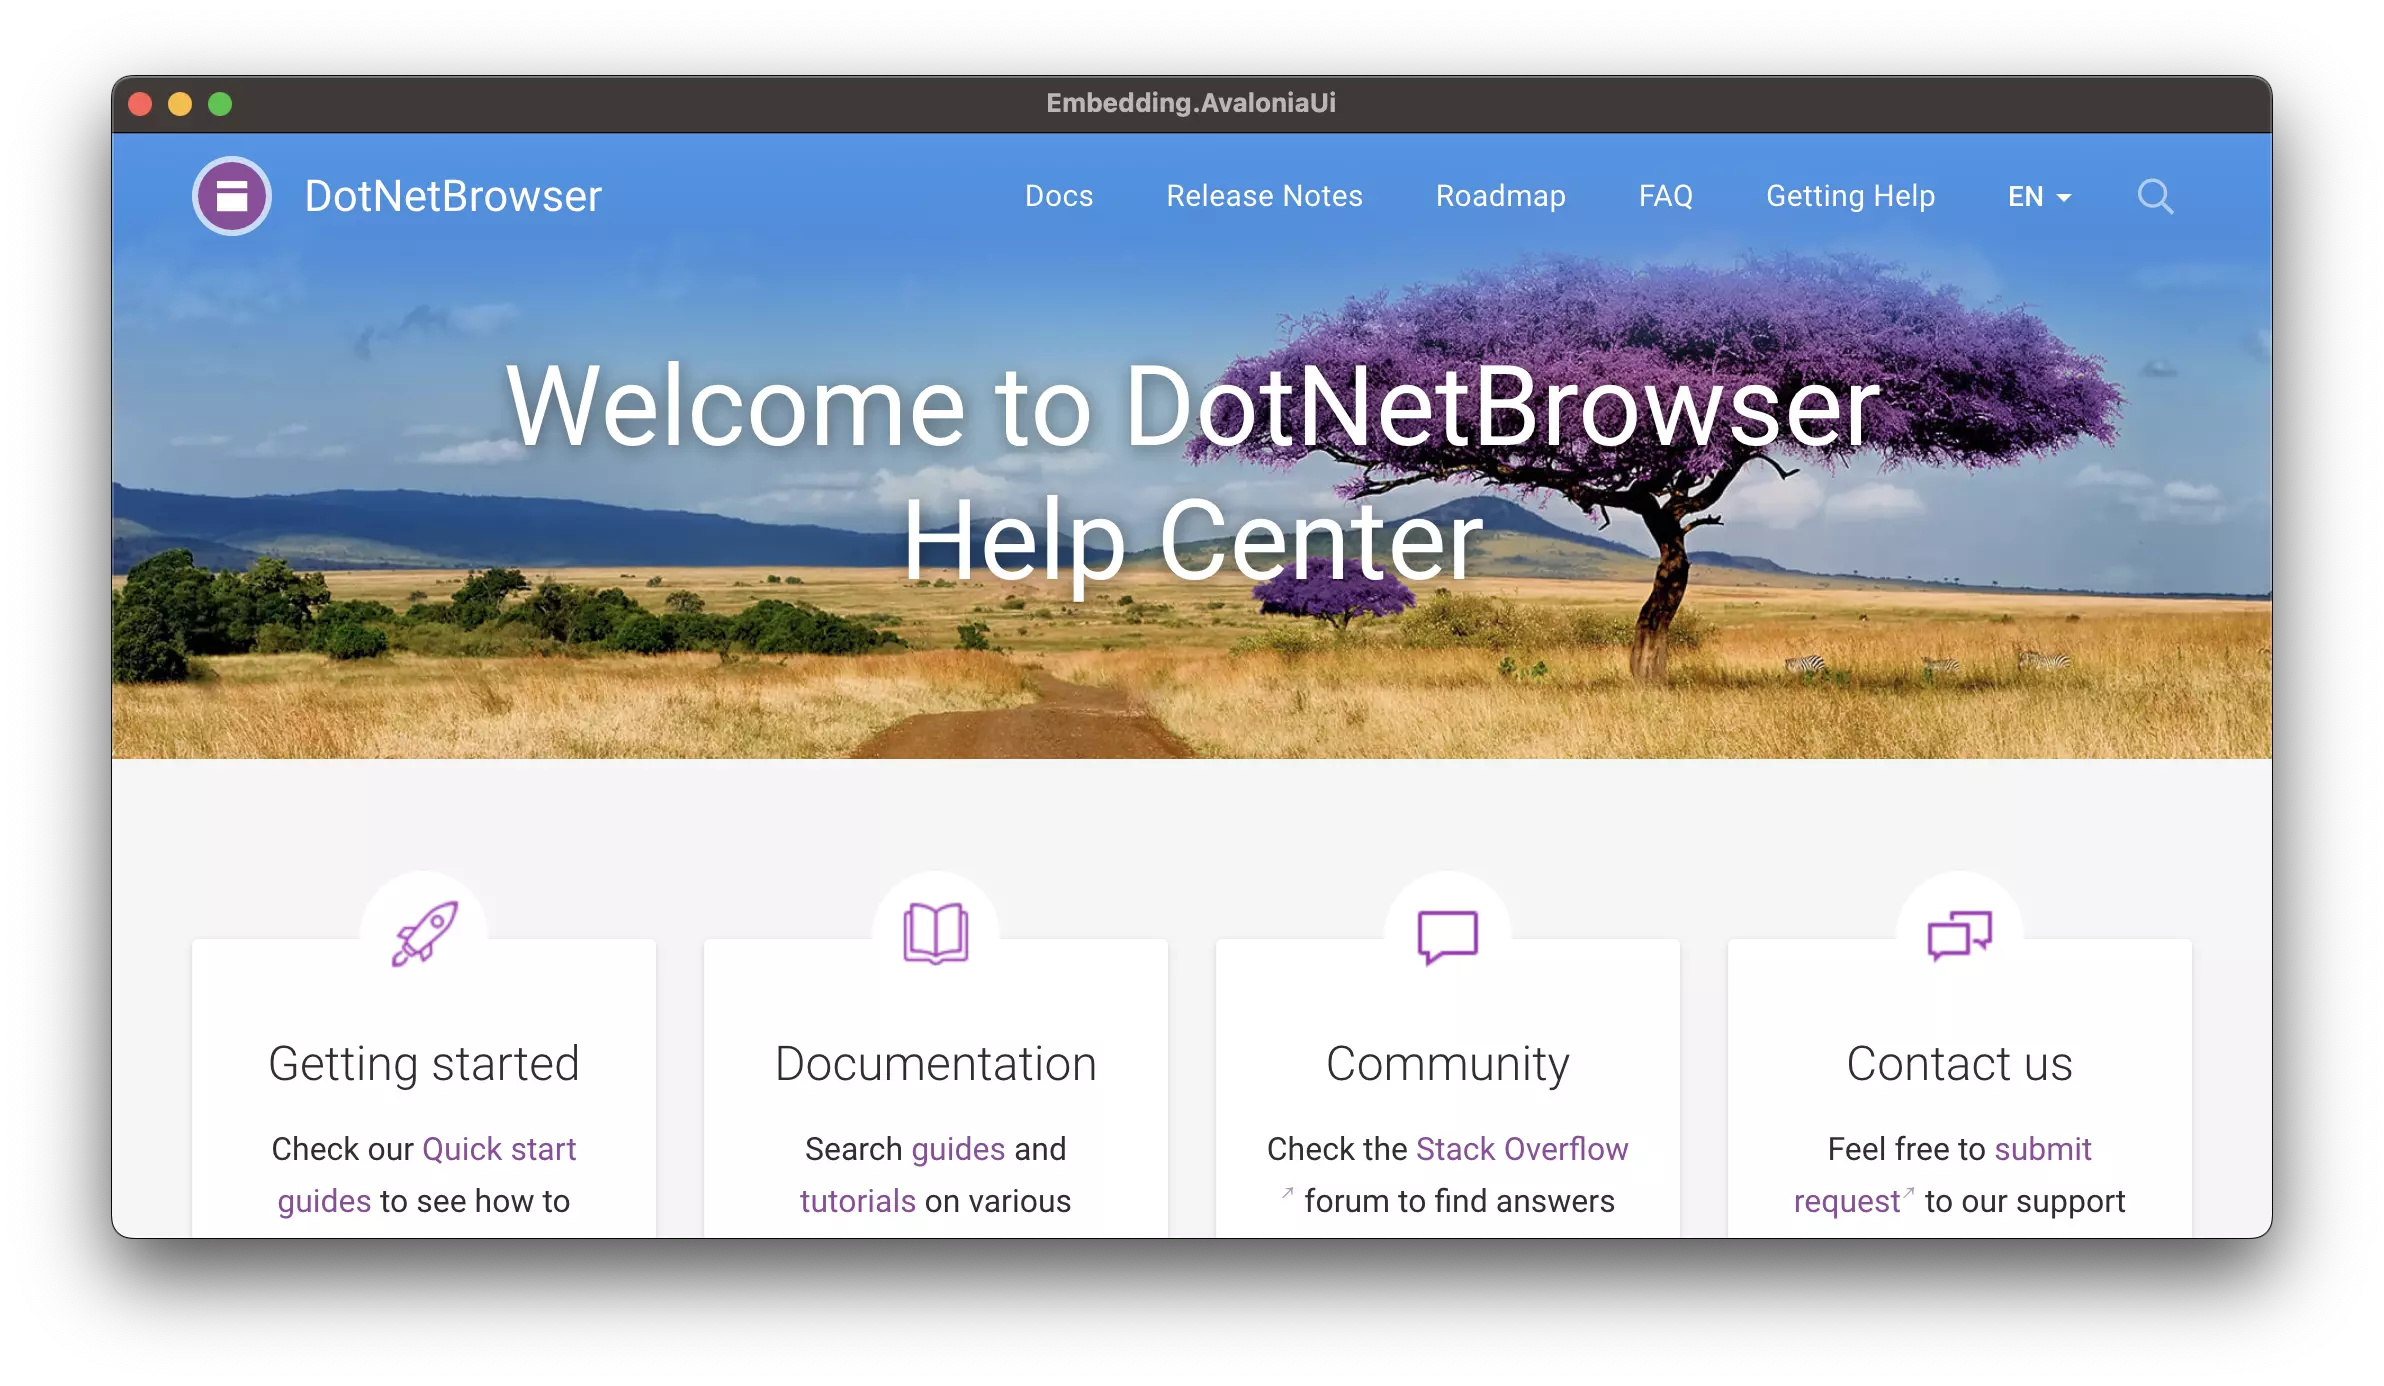 DotNetBrowser and Avalonia application on macOS